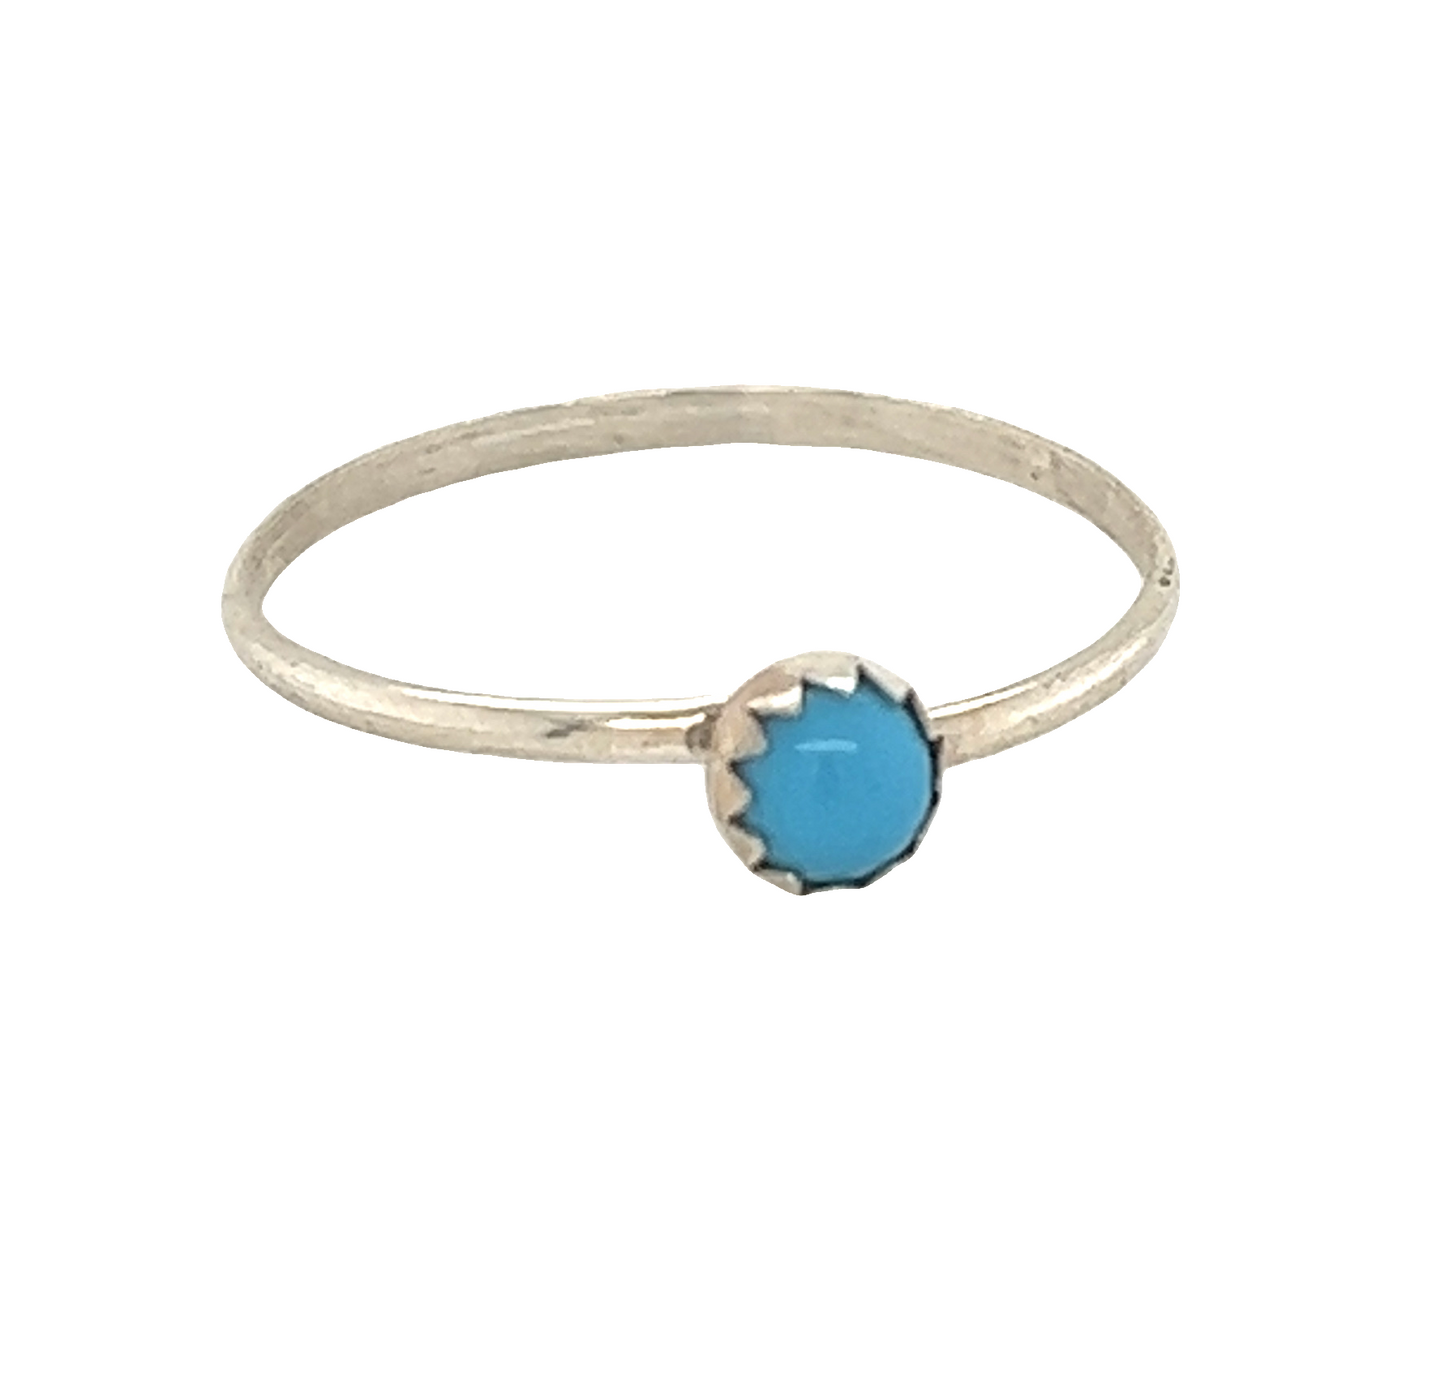 A Tiny Handcrafted Turquoise Ring with a sterling silver stone.